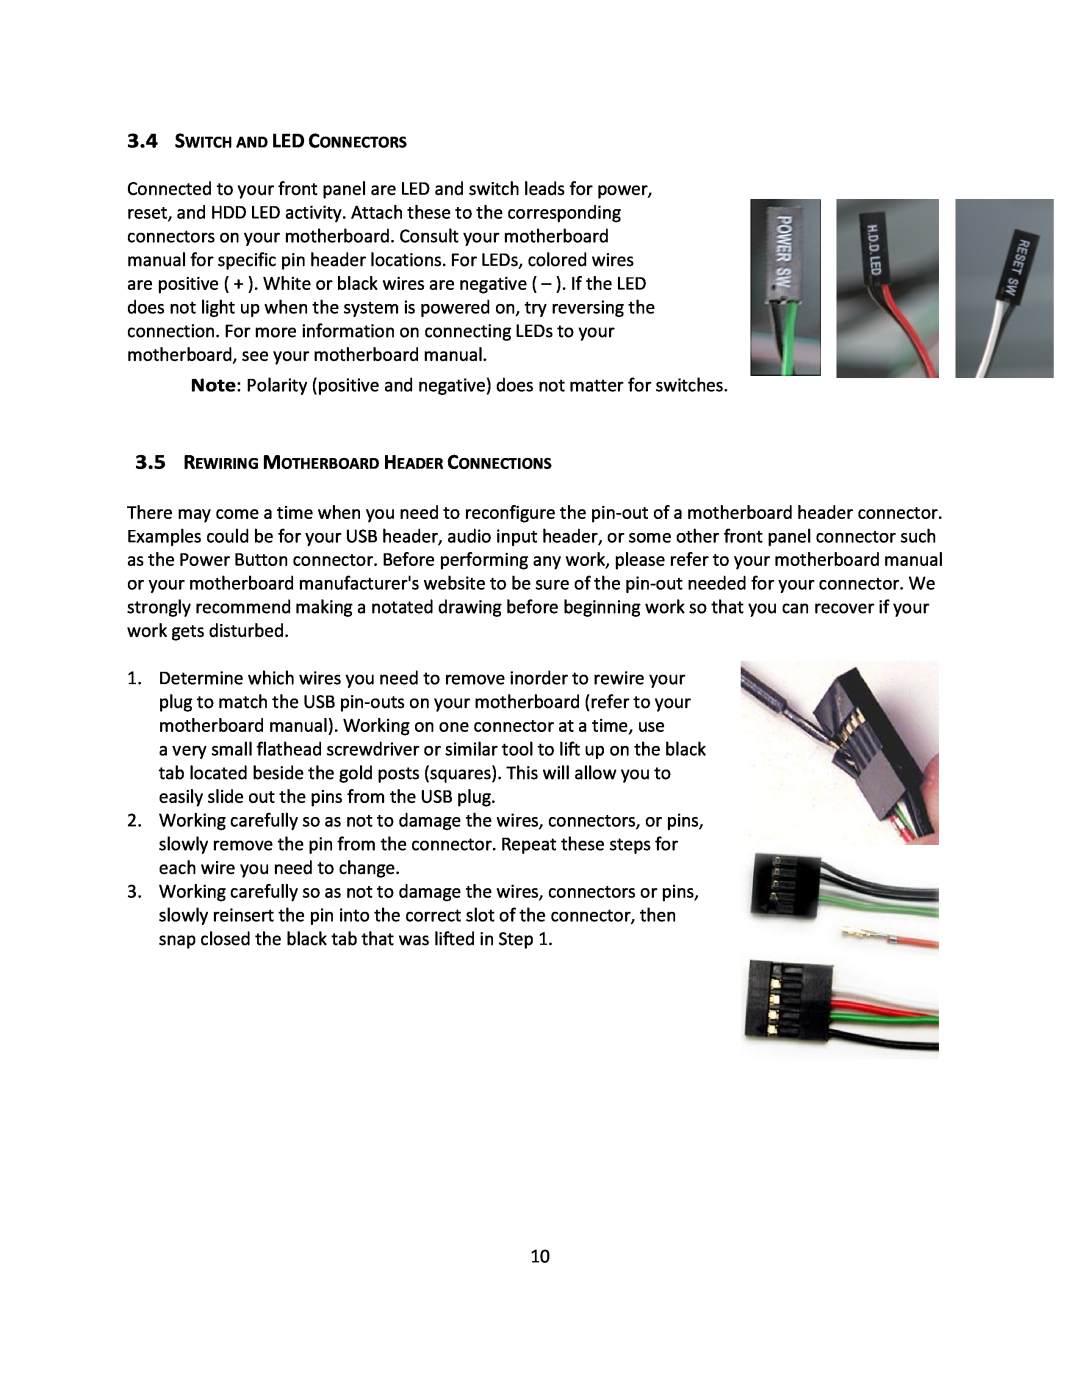 Antec P193 V3 user manual Note Polarity positive and negative does not matter for switches 